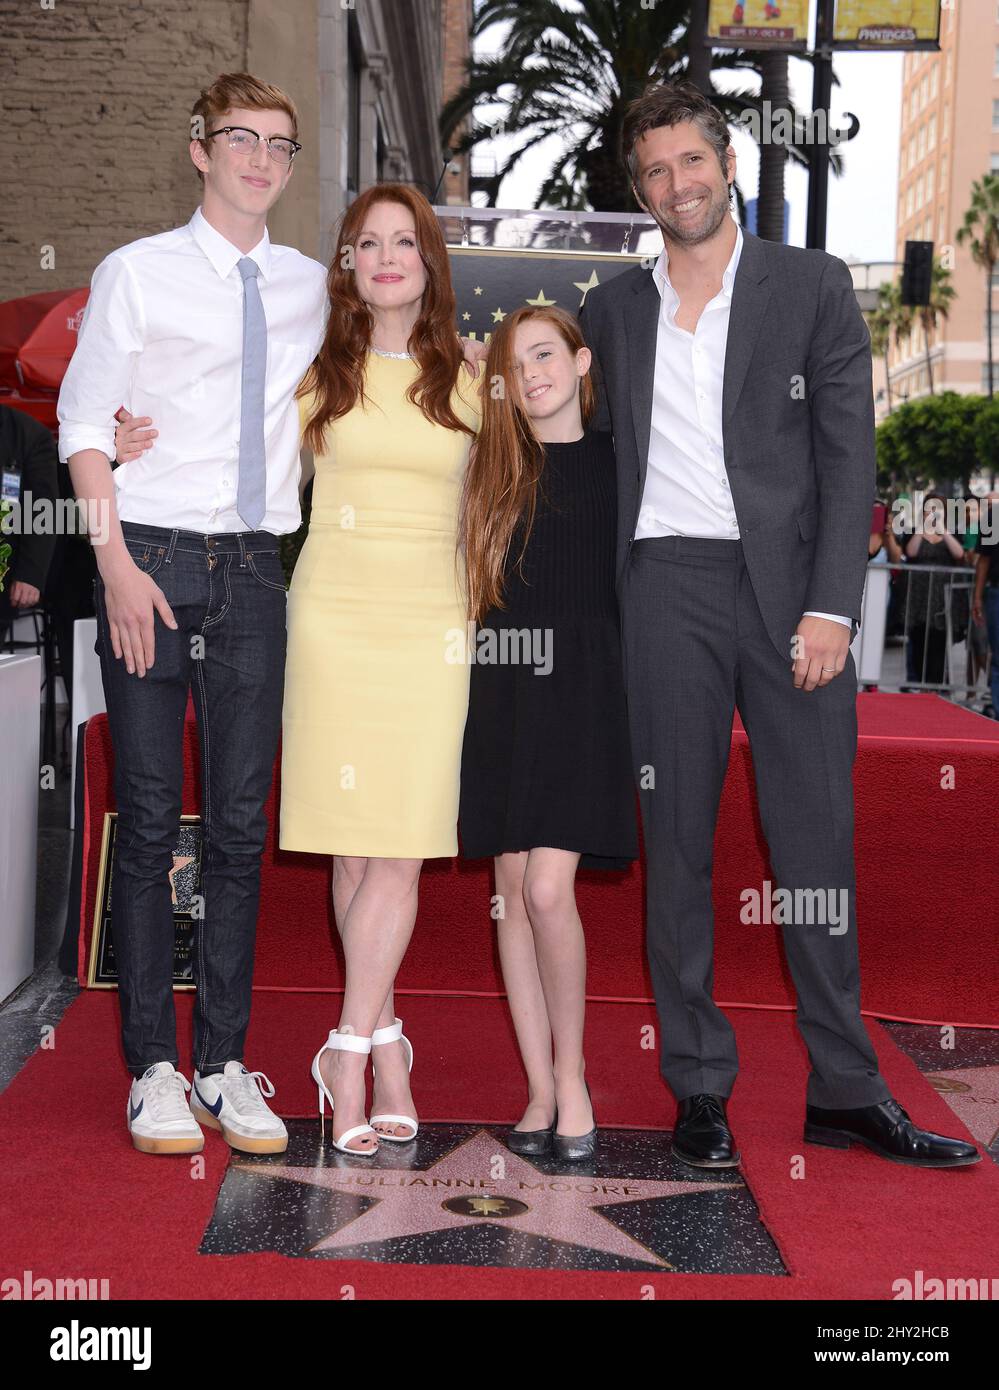 Caleb Freundlich, Julianne Moore, Liv Freundlich and Bart Freundlich attending the Star Ceremony for Julianne Moore on the Hollywood Walk of Fame in Los Angeles, California. Stock Photo